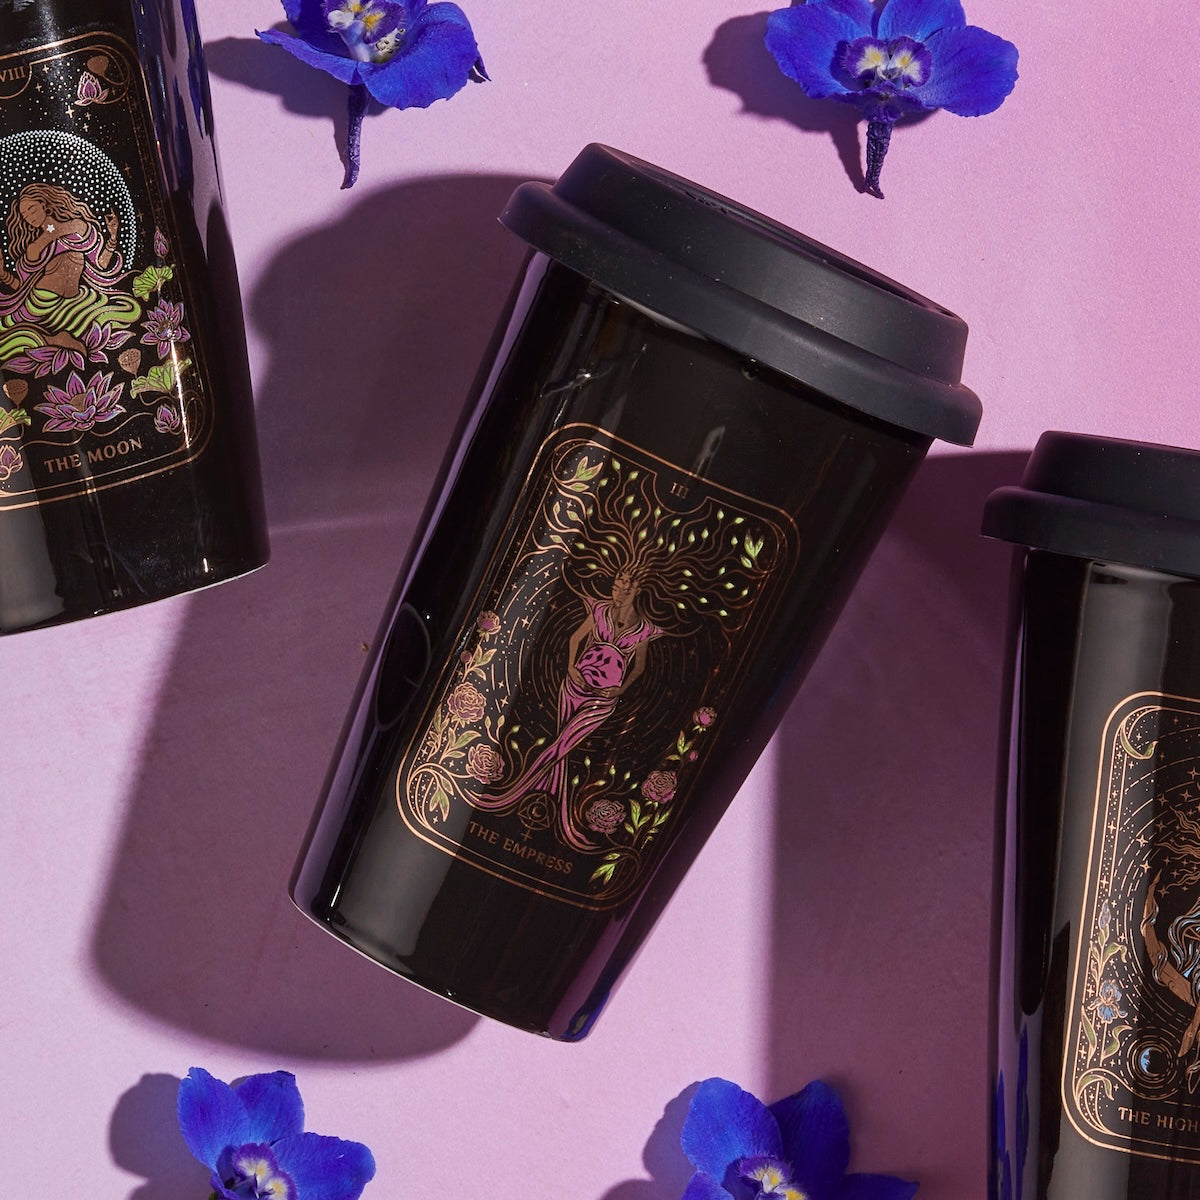 Three black travel mugs featuring tarot card designs—&quot;The Moon,&quot; &quot;The Empress,&quot; and &quot;The High Priestess&quot;—are arranged on a pink surface. Surrounded by scattered purple flowers, these mugs set the perfect scene for enjoying your The Queen of Cups - Tarot To Go! or Magic Hour in style.